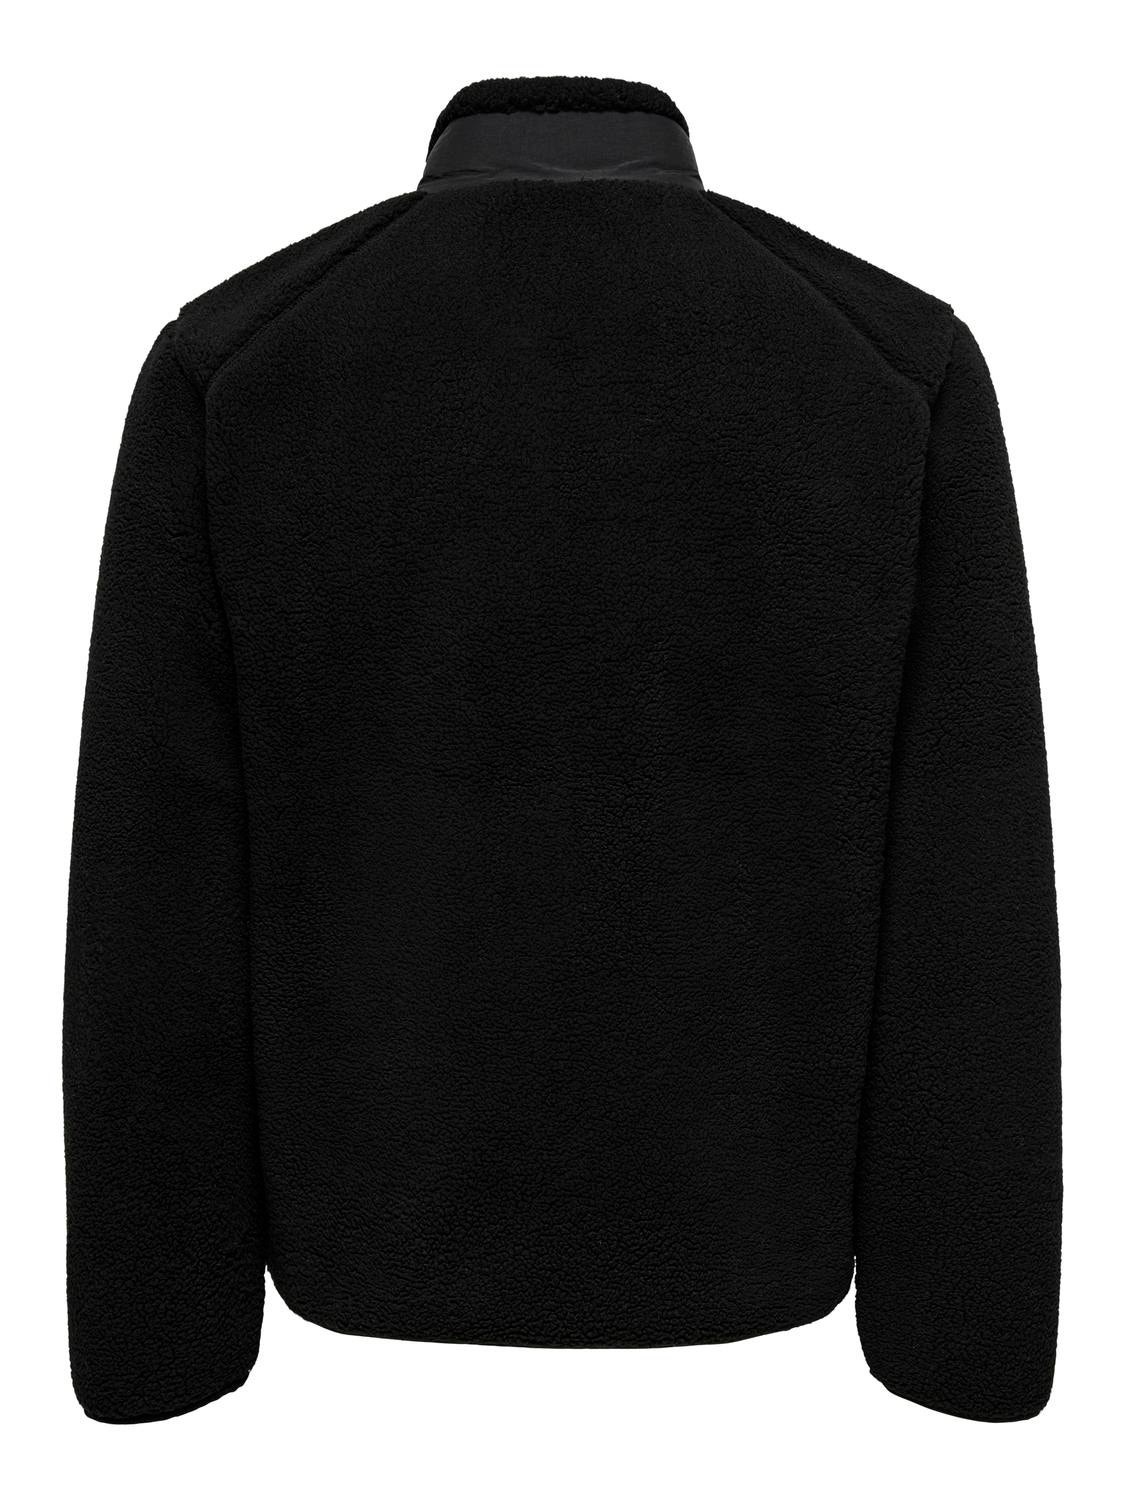 ONLY & SONS High neck Cuffs with elastic binding Jacket -Black - 22025599